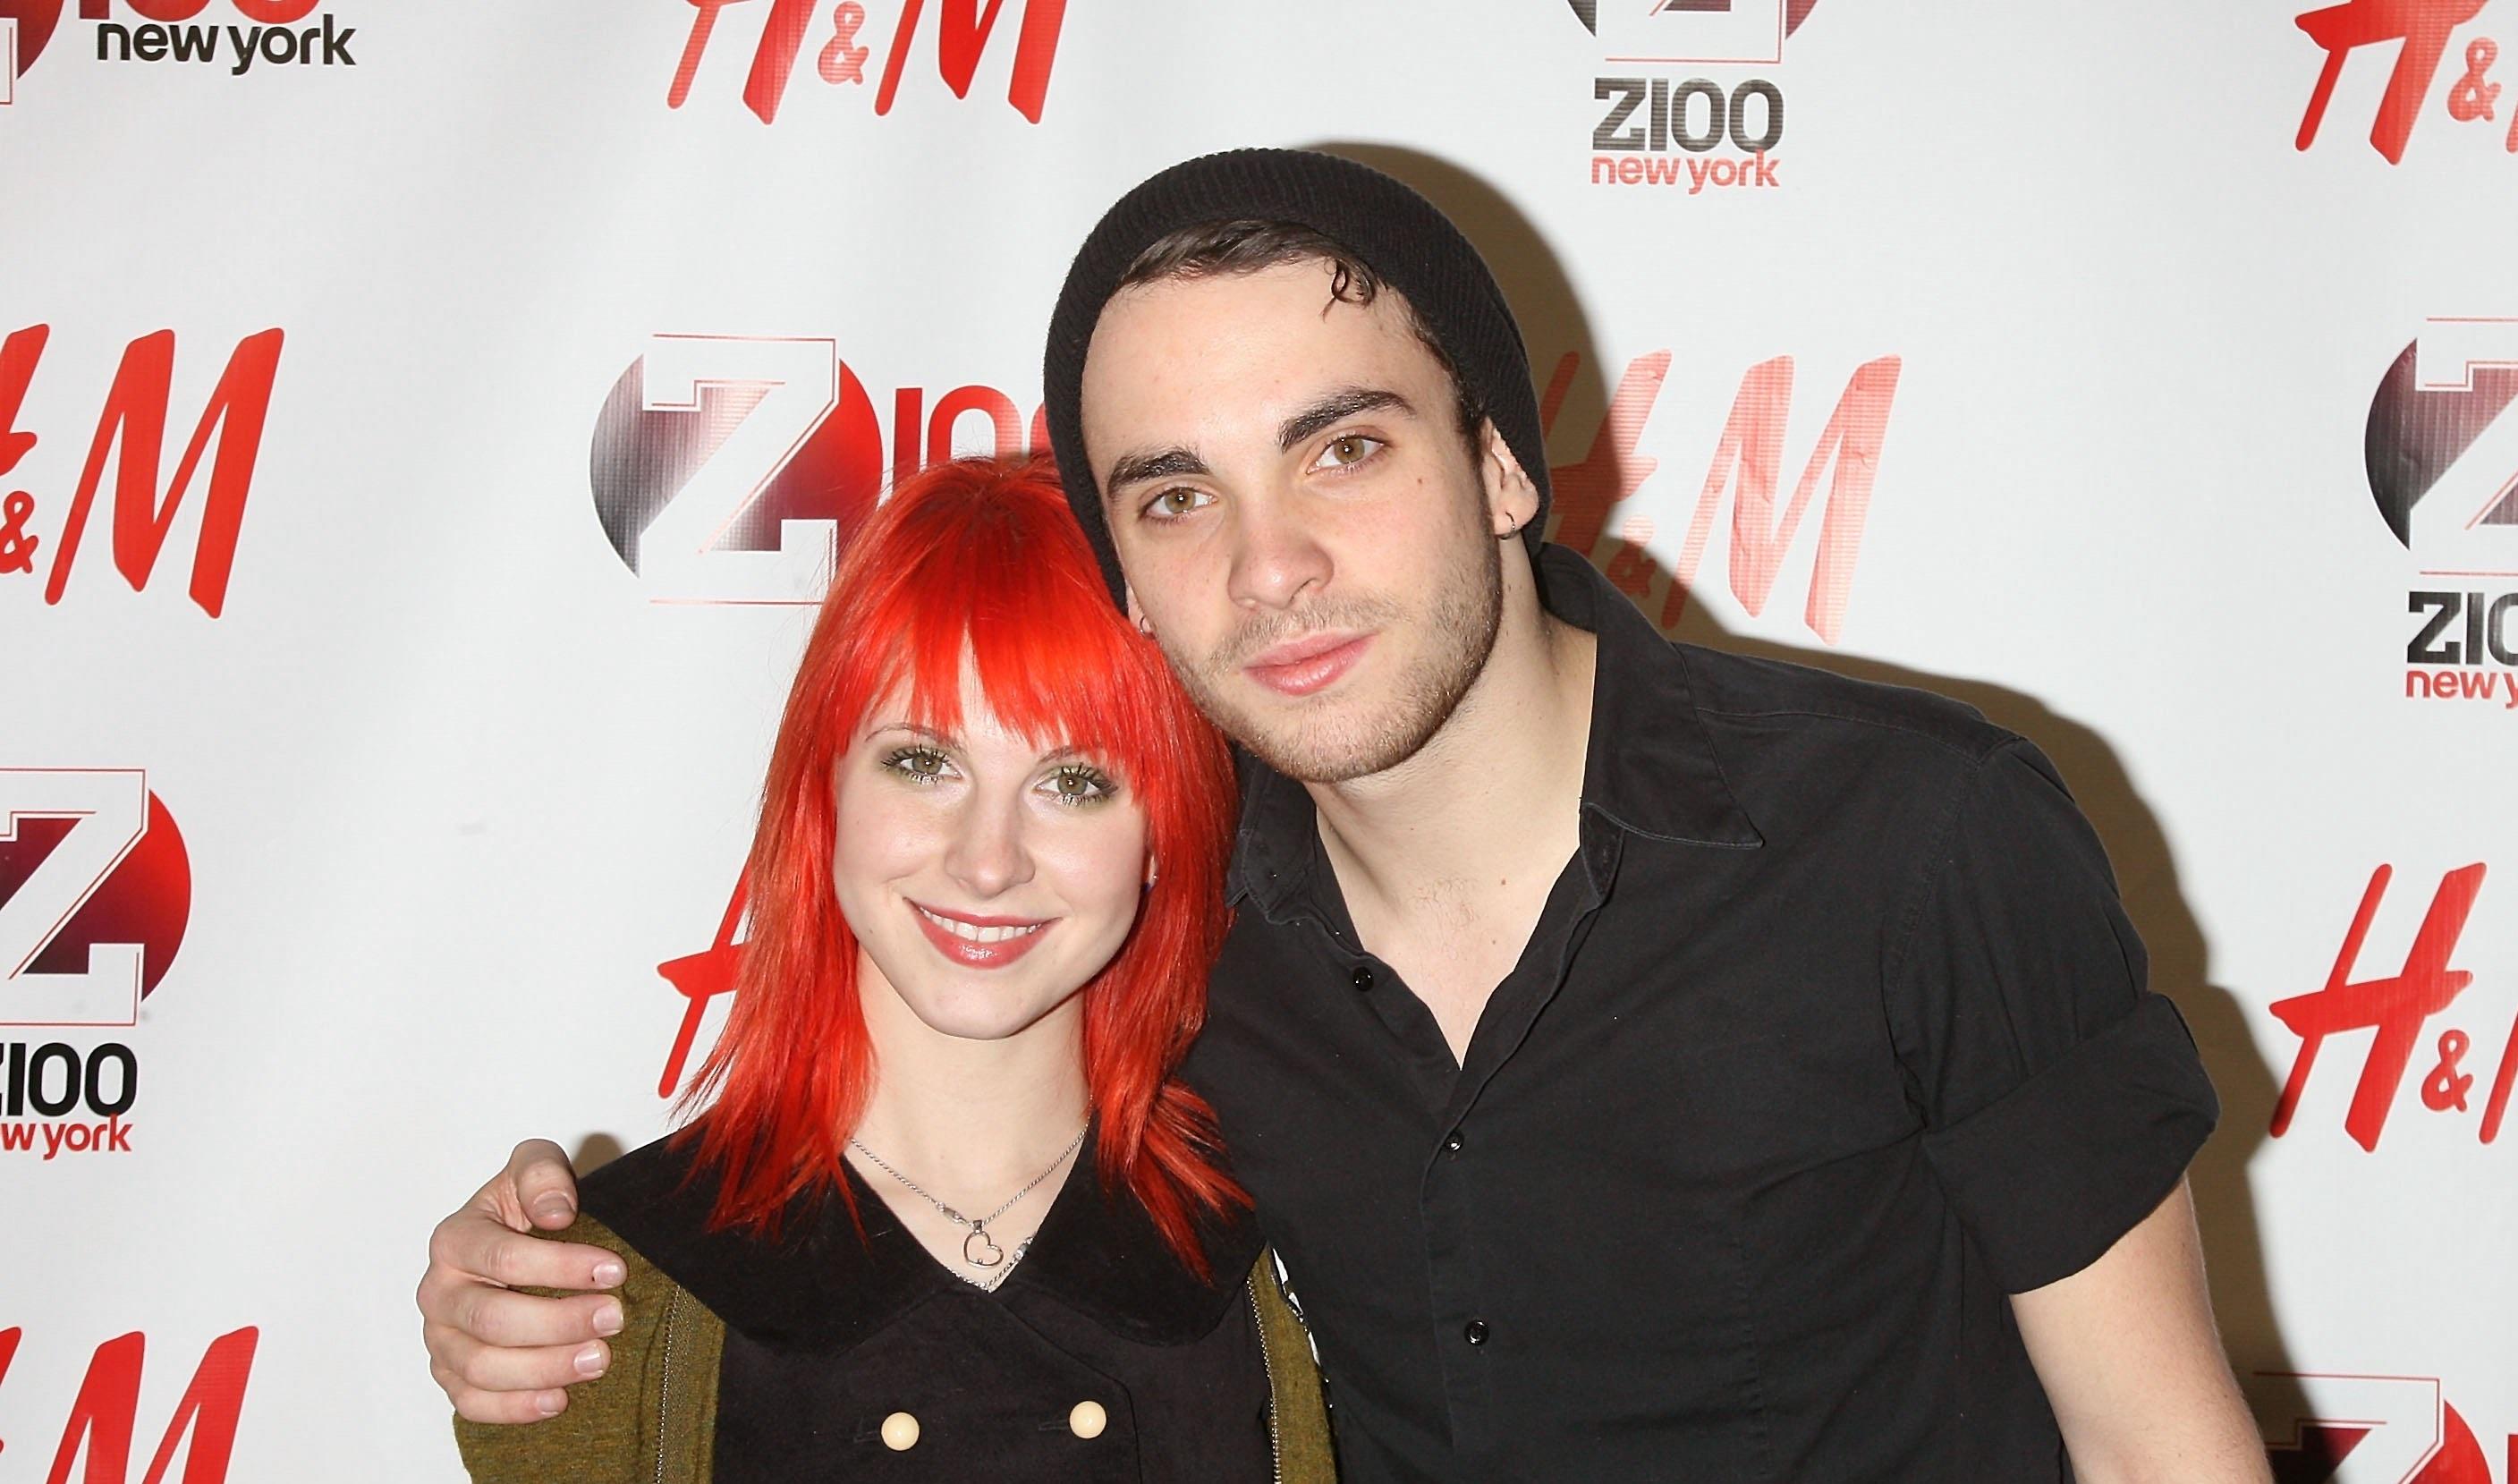 Paramore bandmates Hayley Williams and Taylor York are dating.